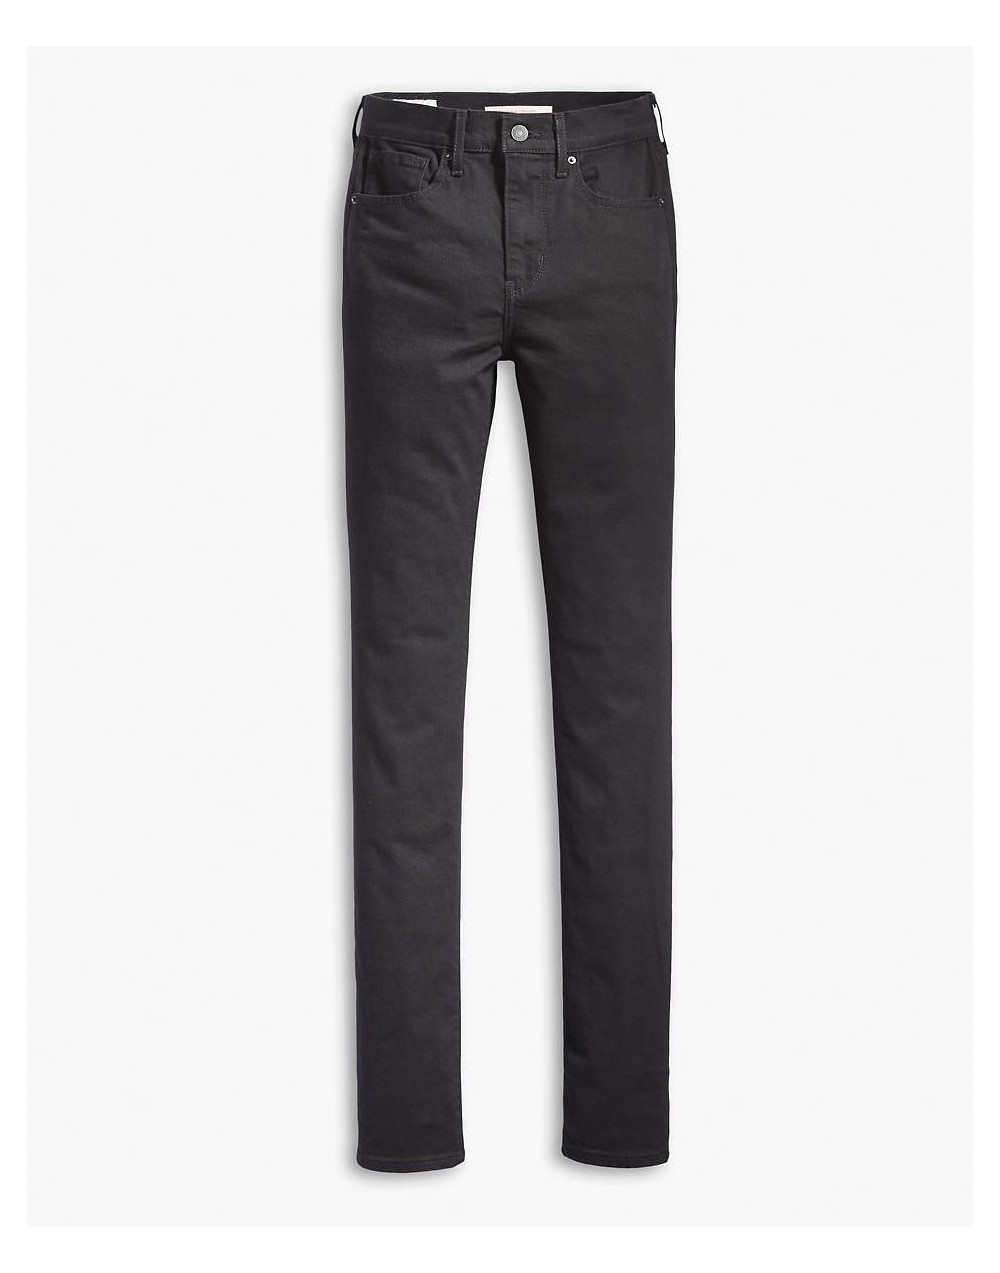 Jeansy Levi's®  724 High Rise Straight Night Is Black  18883-0006